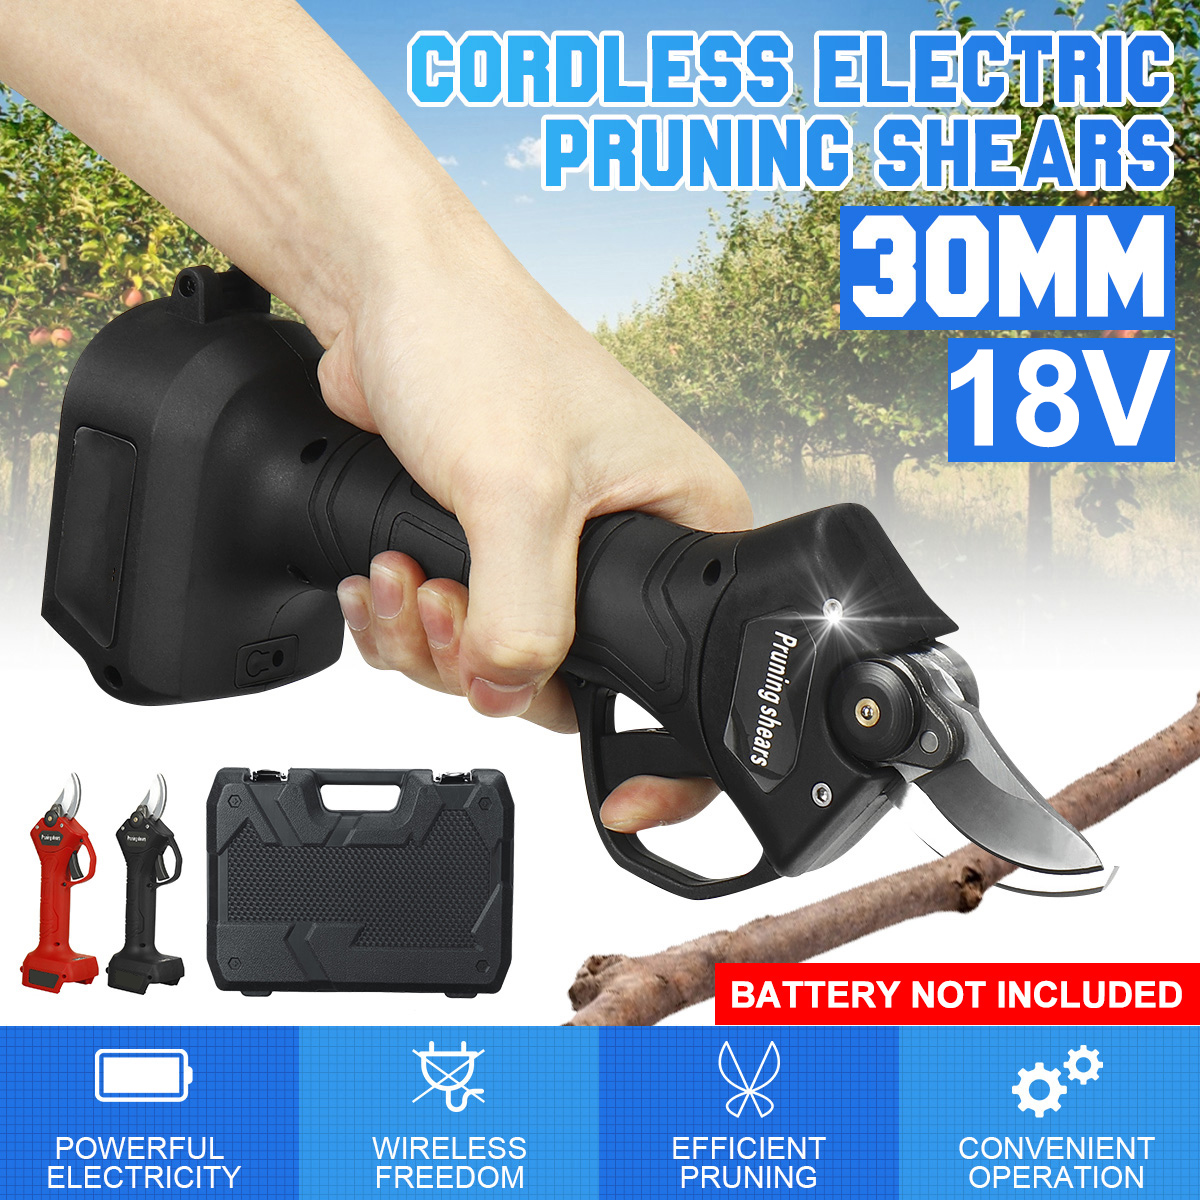 30mm-Cordless-Electric-Pruning-Shears-Liion-Battery-Leaves-Trimmer-Garden-Power-Tool-Fit-Makita-1885465-2